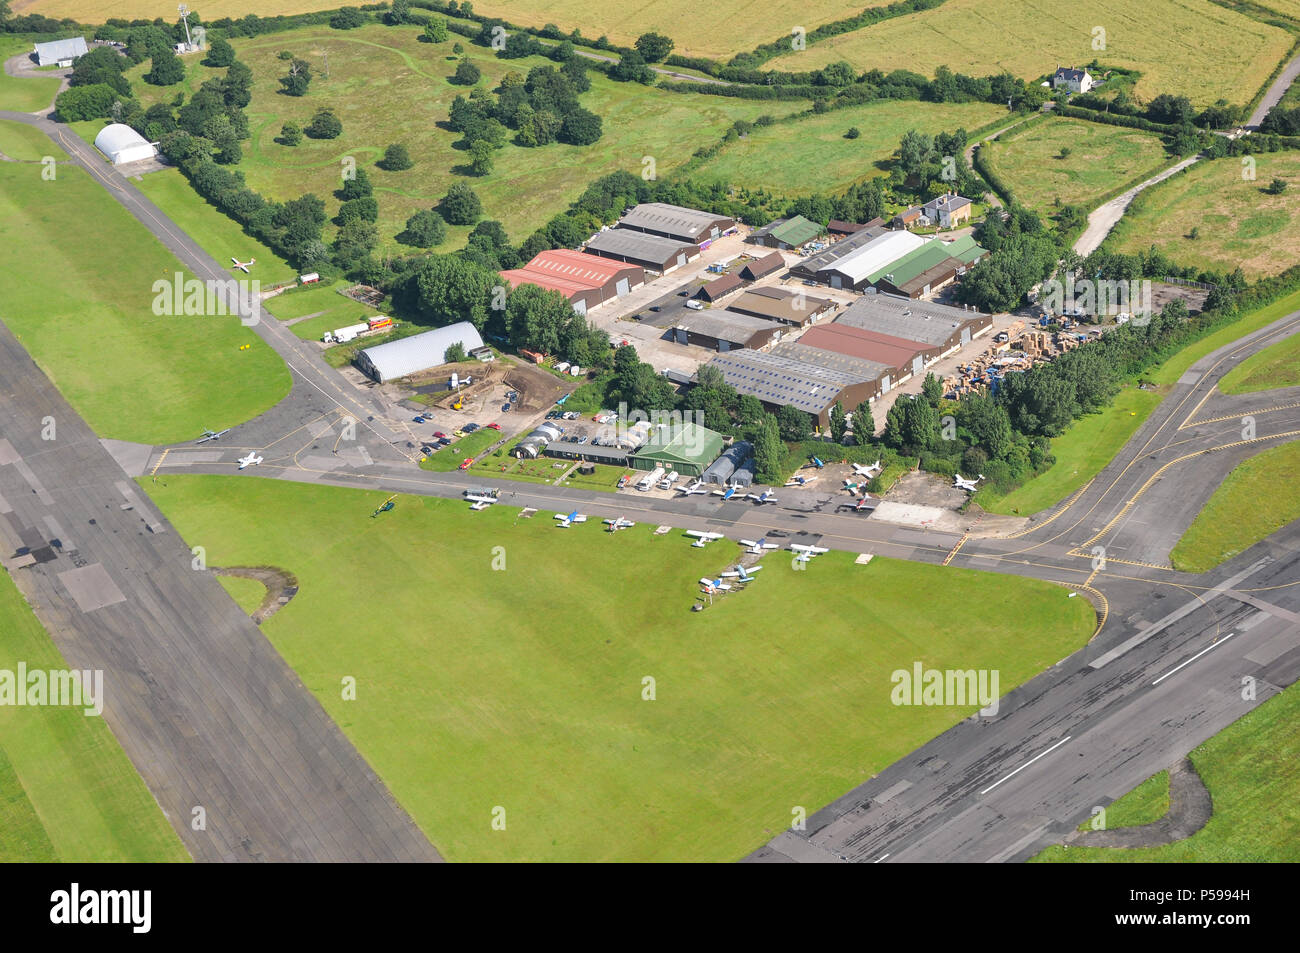 North Weald airfield aerial photograph. The Squadron cafe restaurant, hangars, aircraft and taxiways. Essex, UK. Second World War historic aerodrome Stock Photo